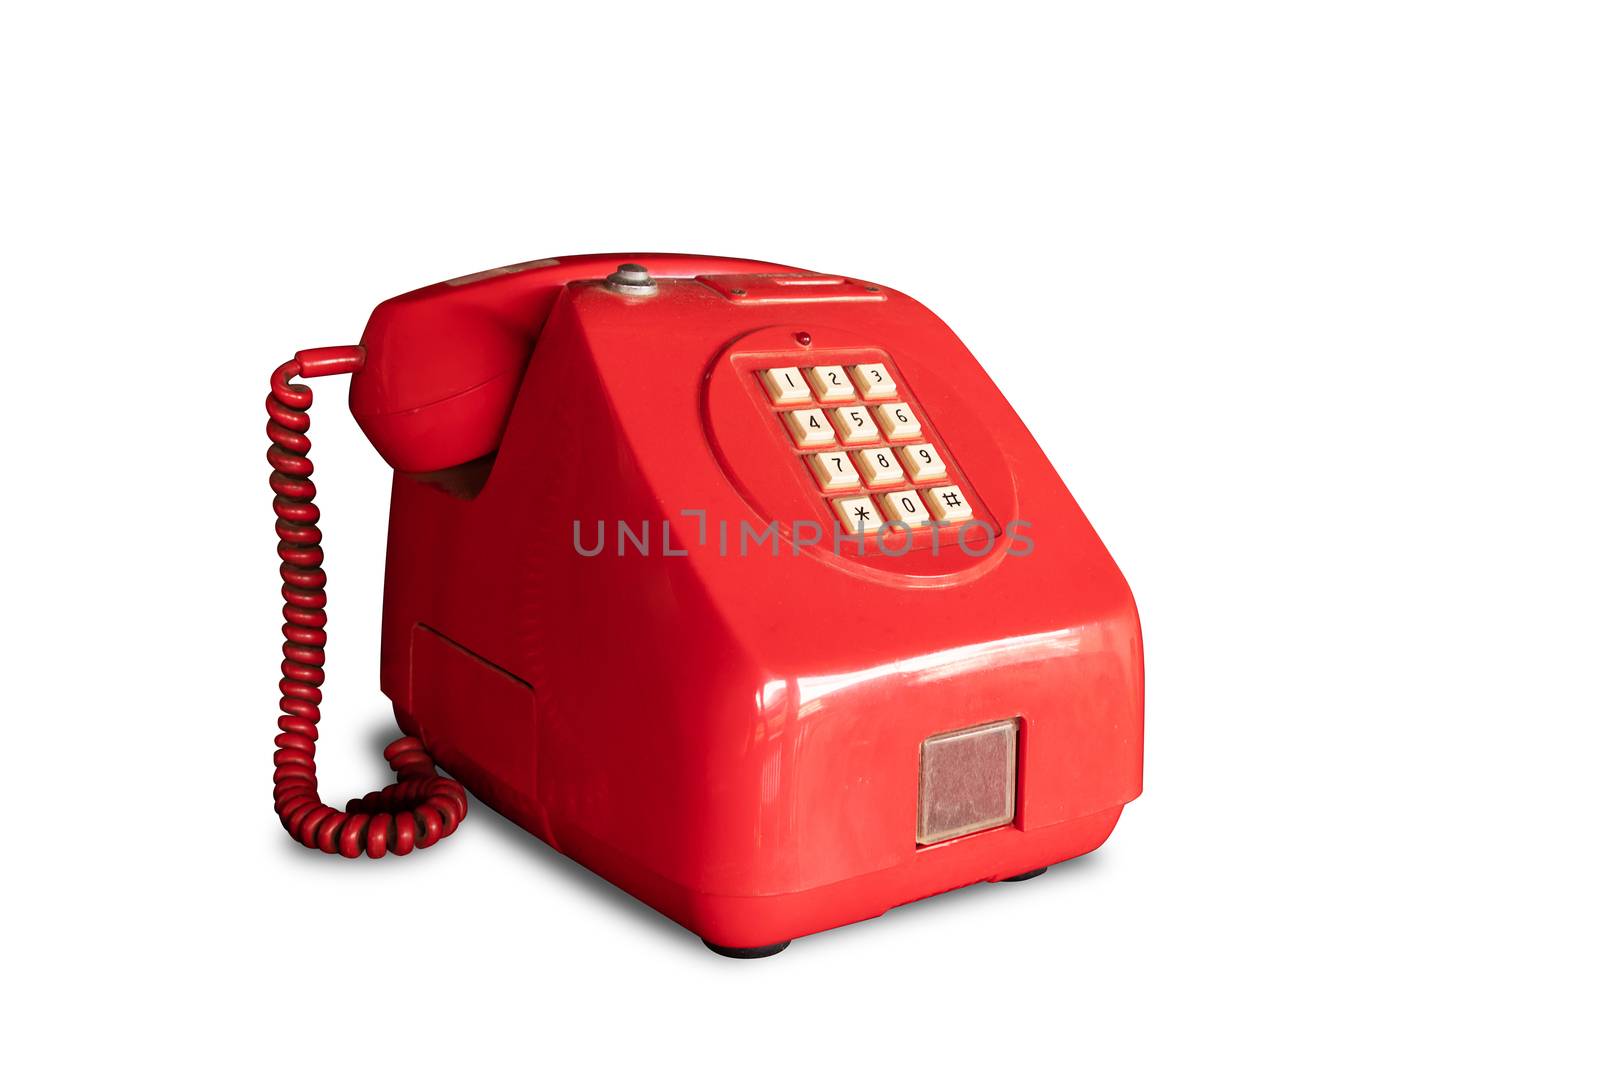 retro red pay phone operated by coins isolated on white background with clipping path